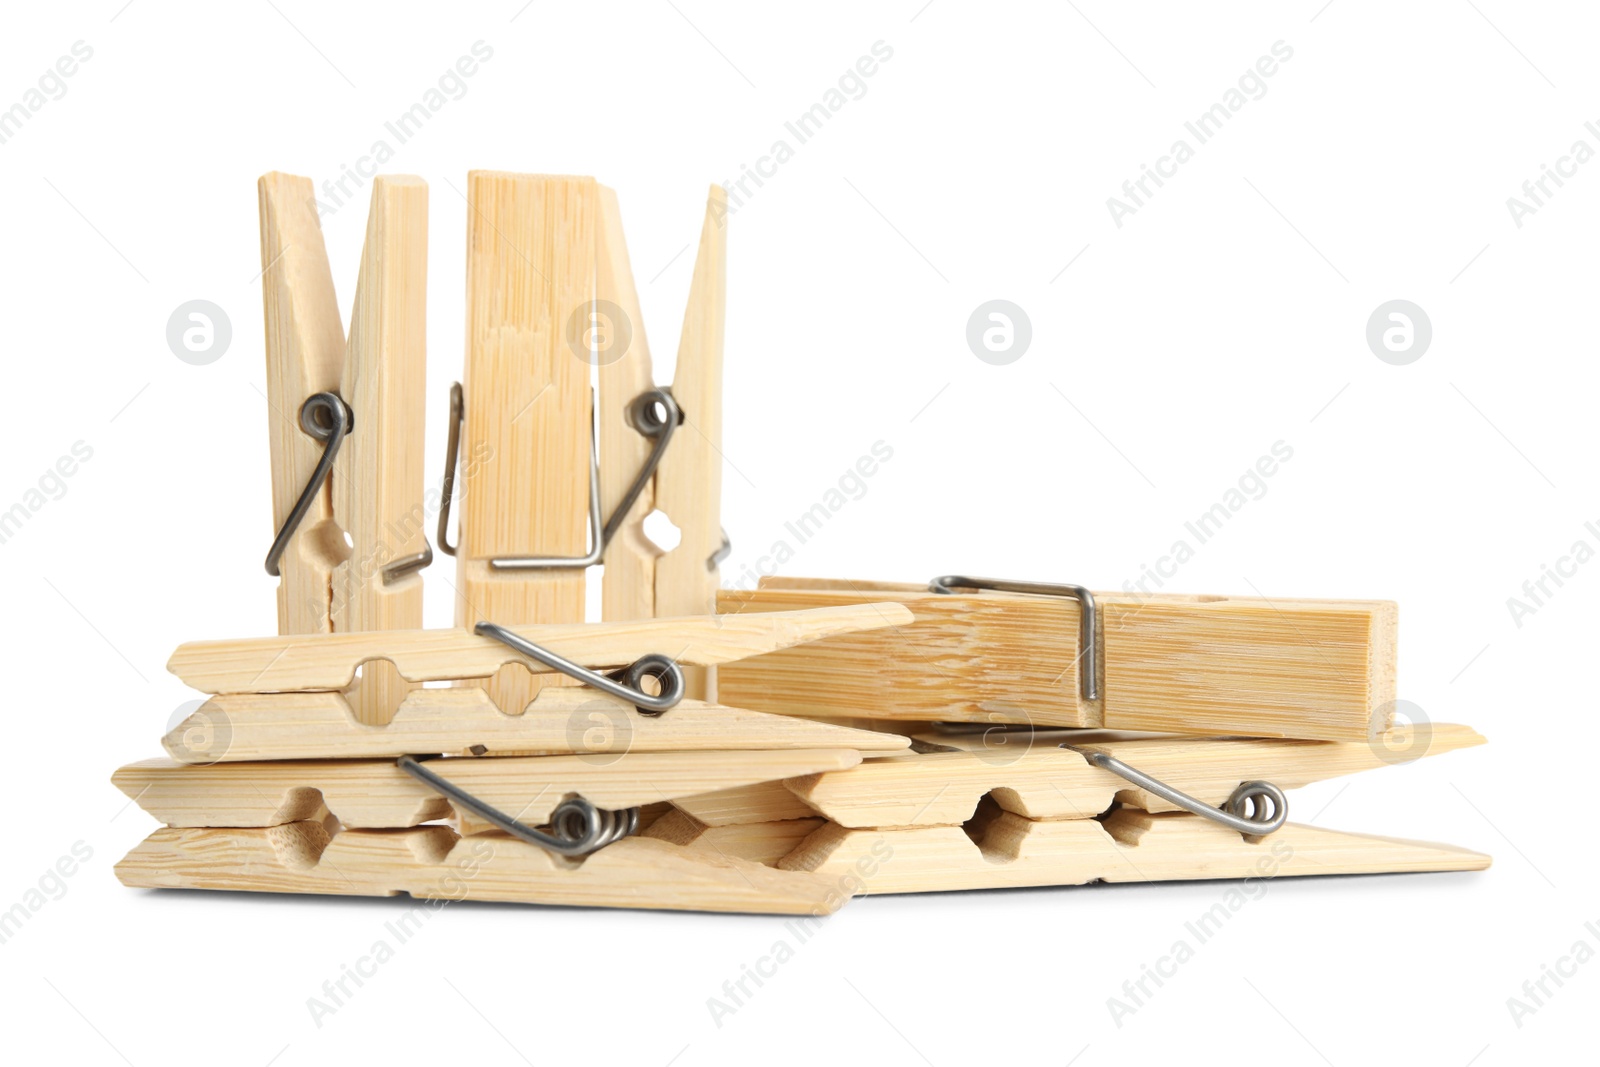 Photo of Set of wooden clothespins on white background